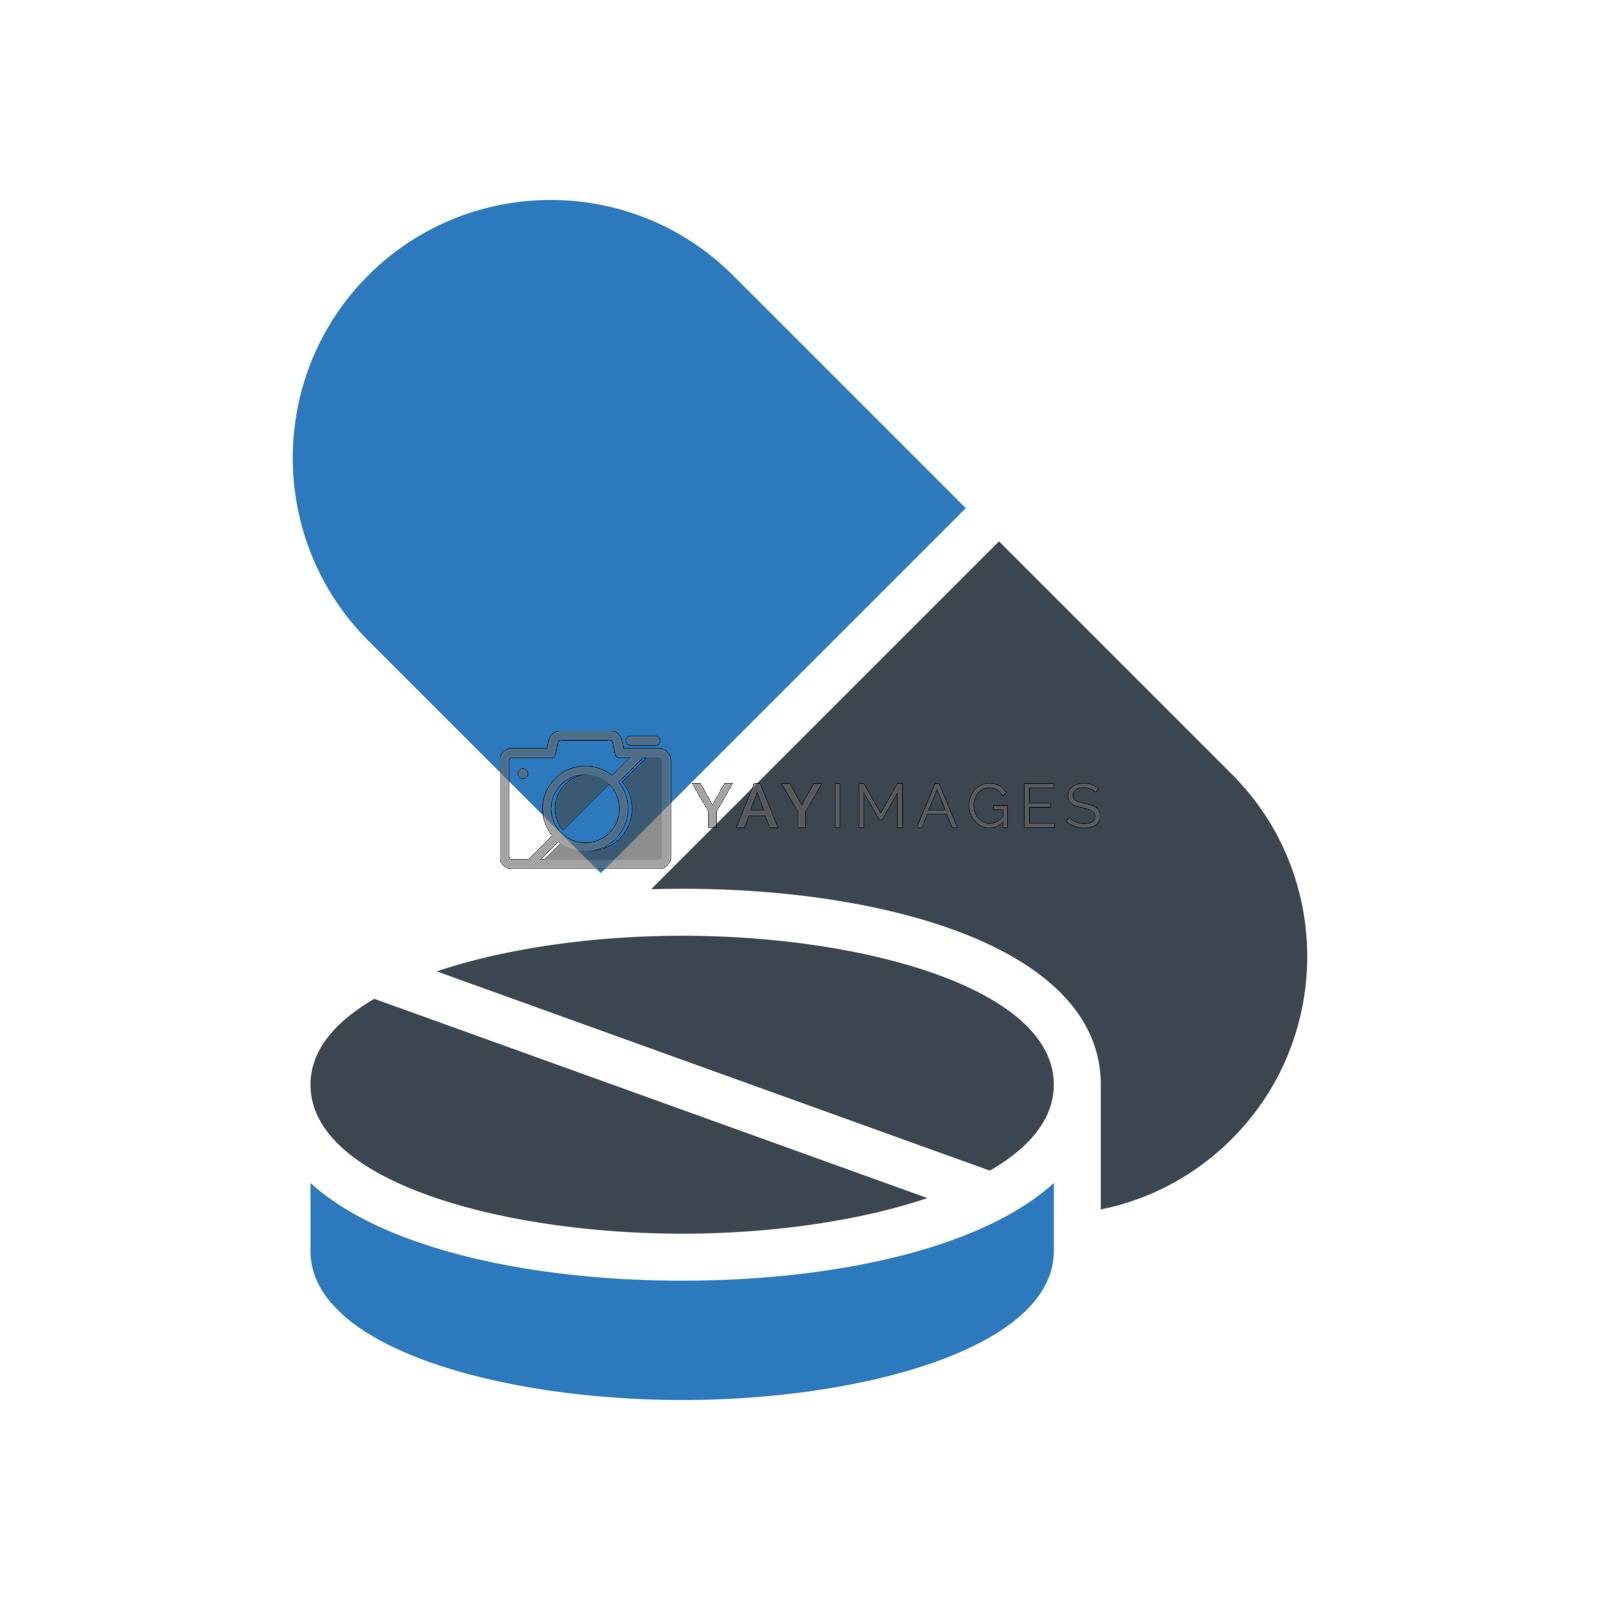 Royalty free image of drugs  by vectorstall